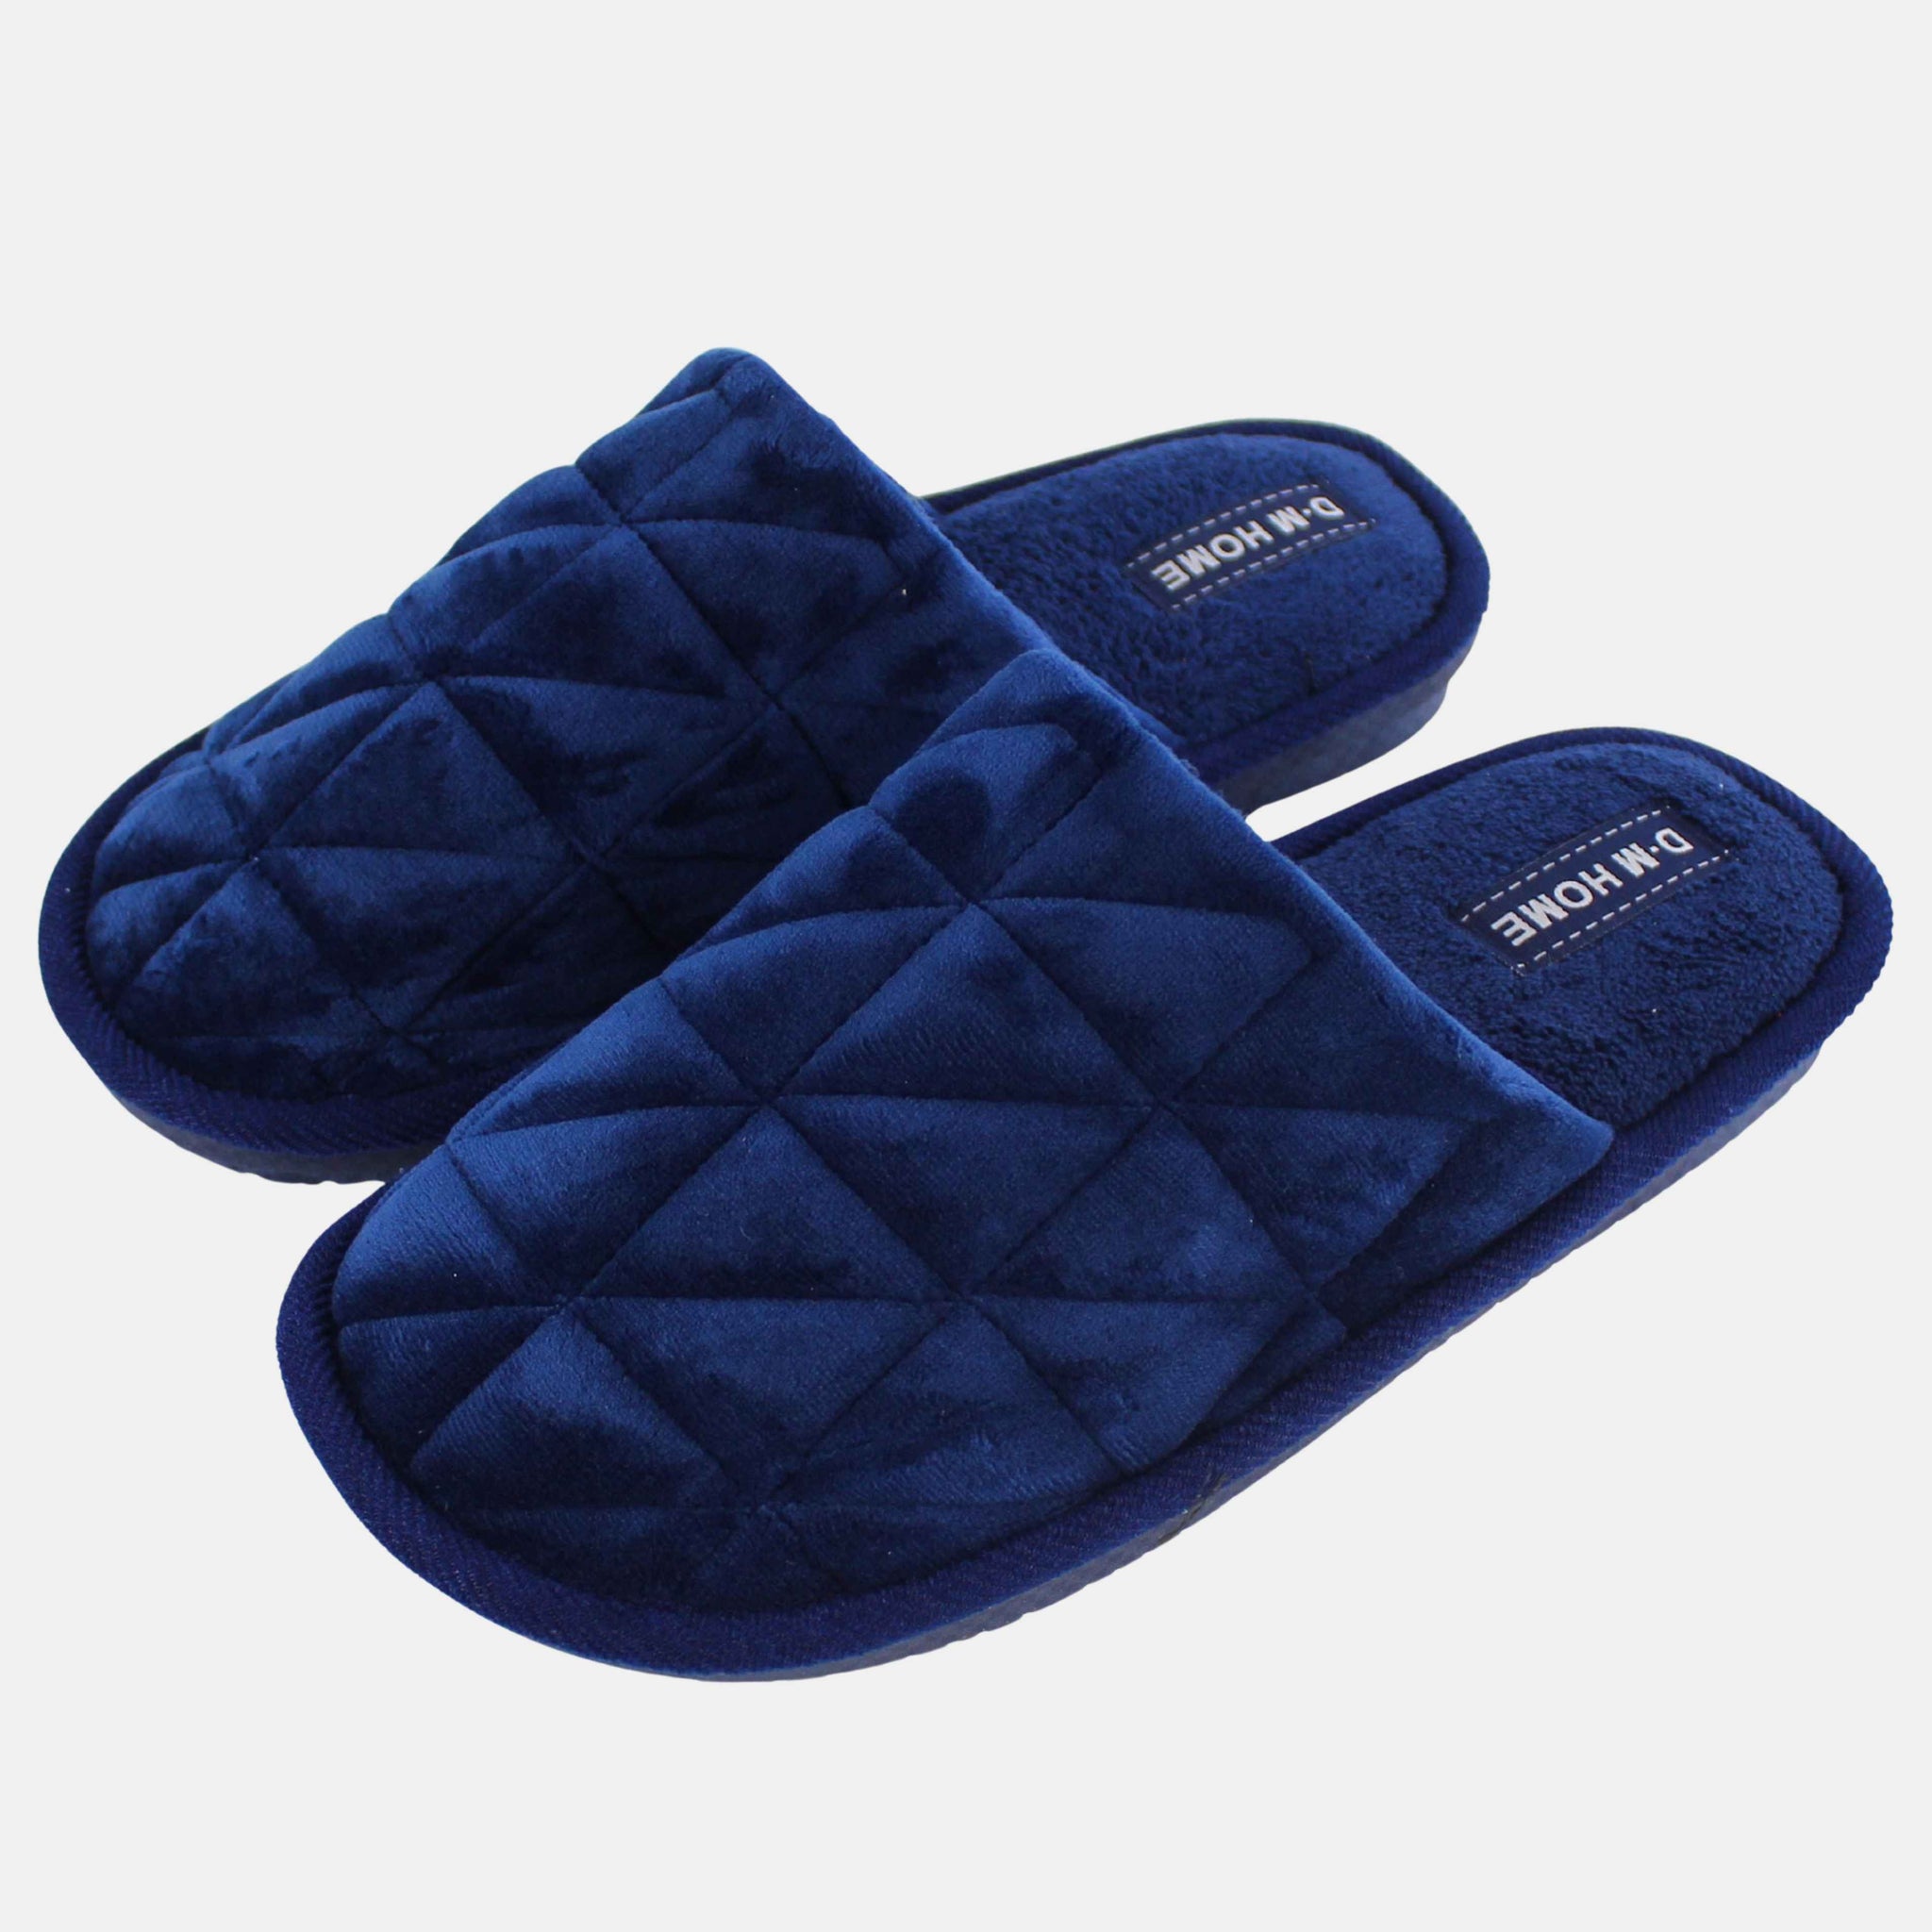 Slippers with 3d effect squares